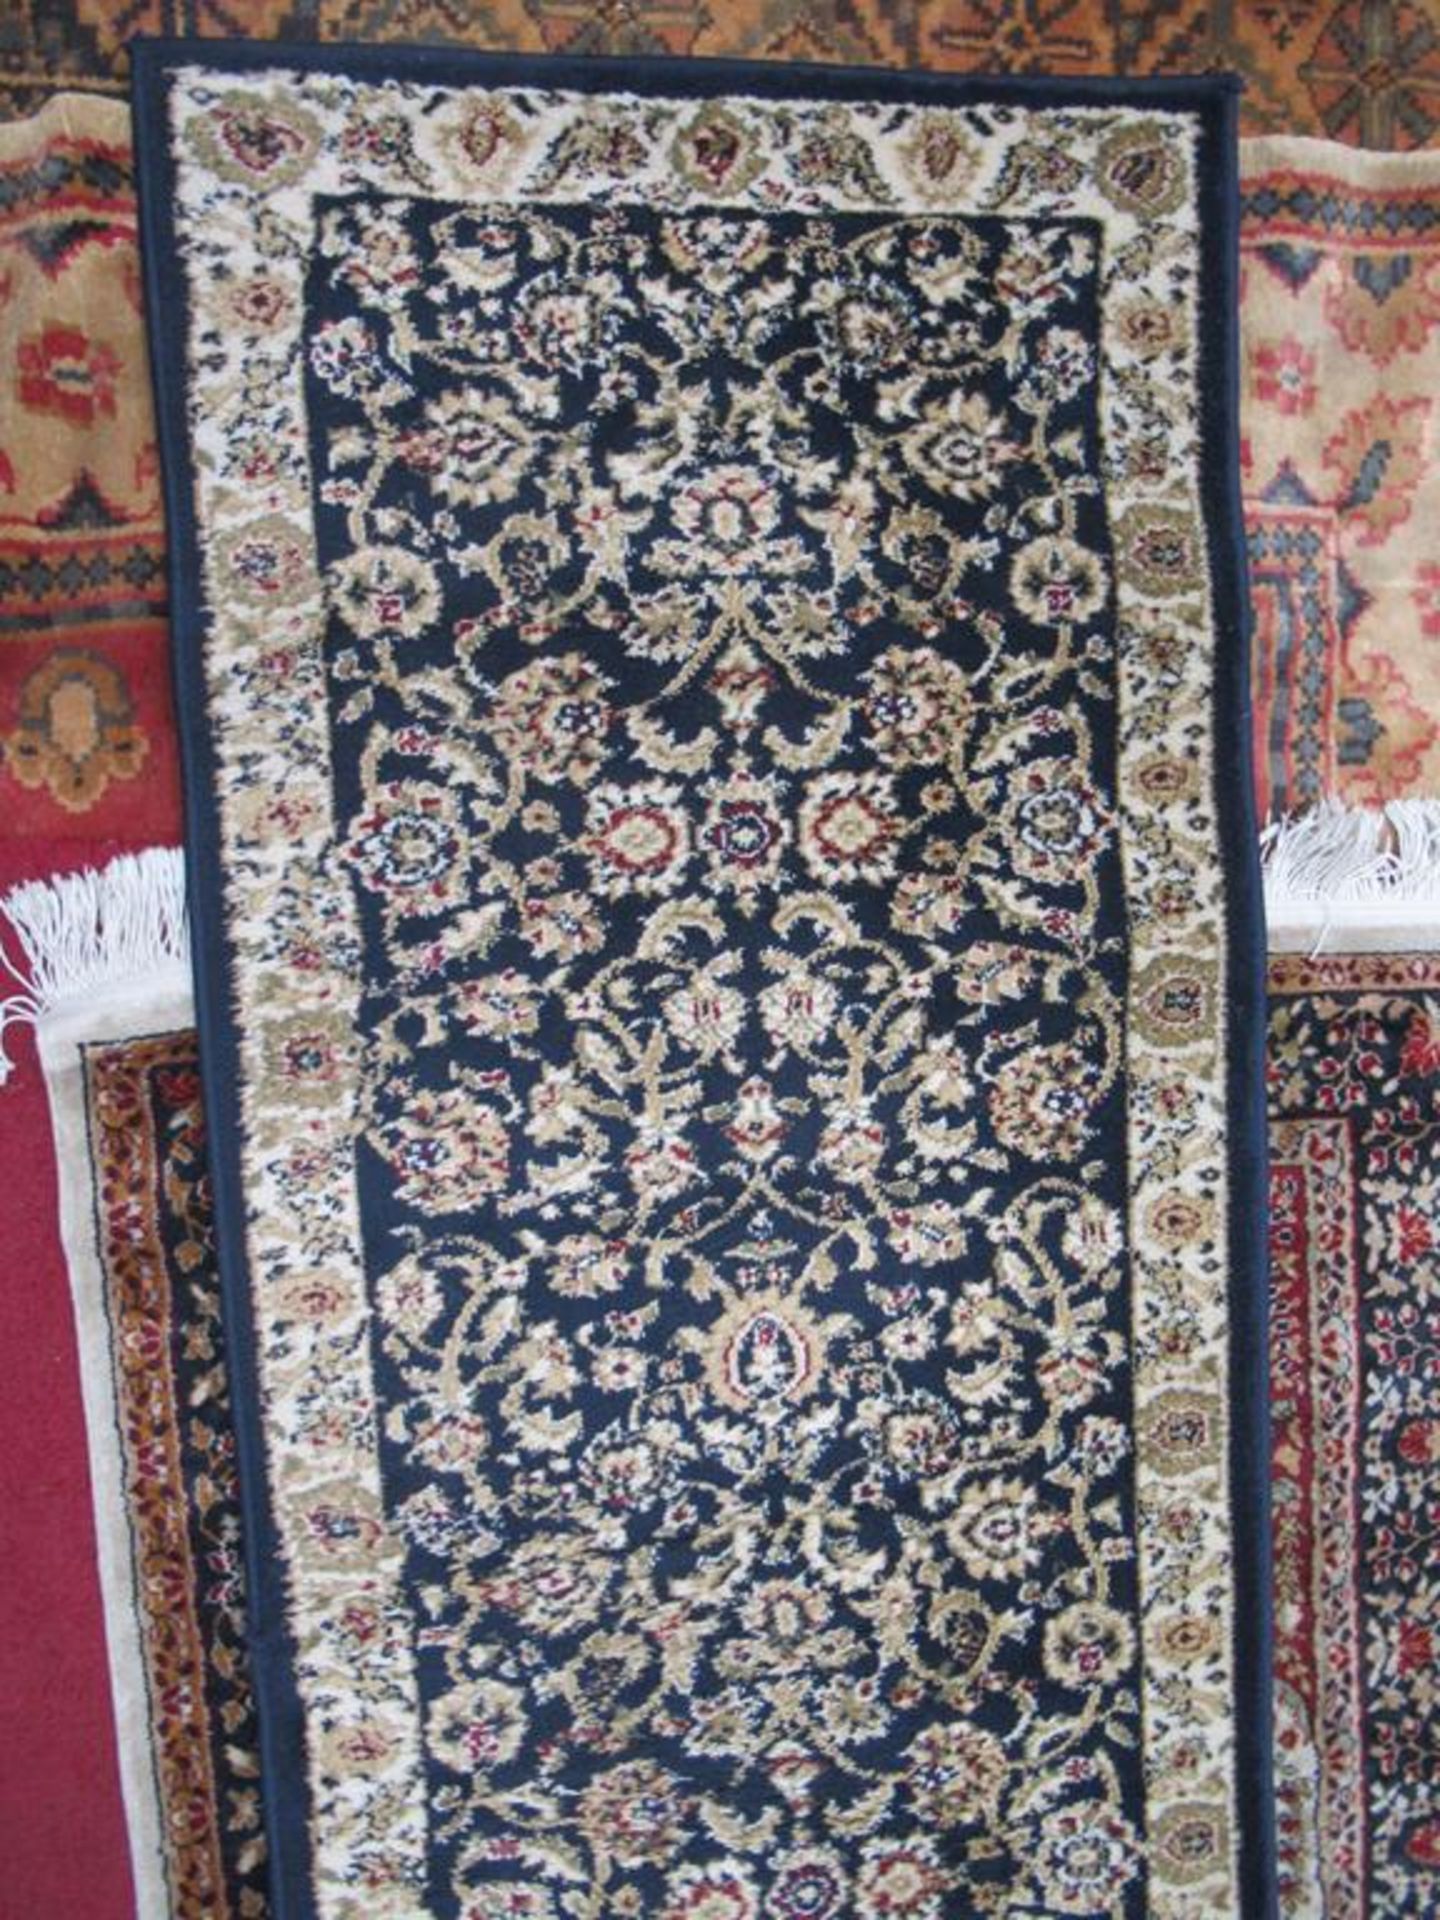 Reproduction Bokhara Rug (size 135cm x 97cm) and Tabriz Navy Rug (size 67cm x 230cm) - Image 4 of 4